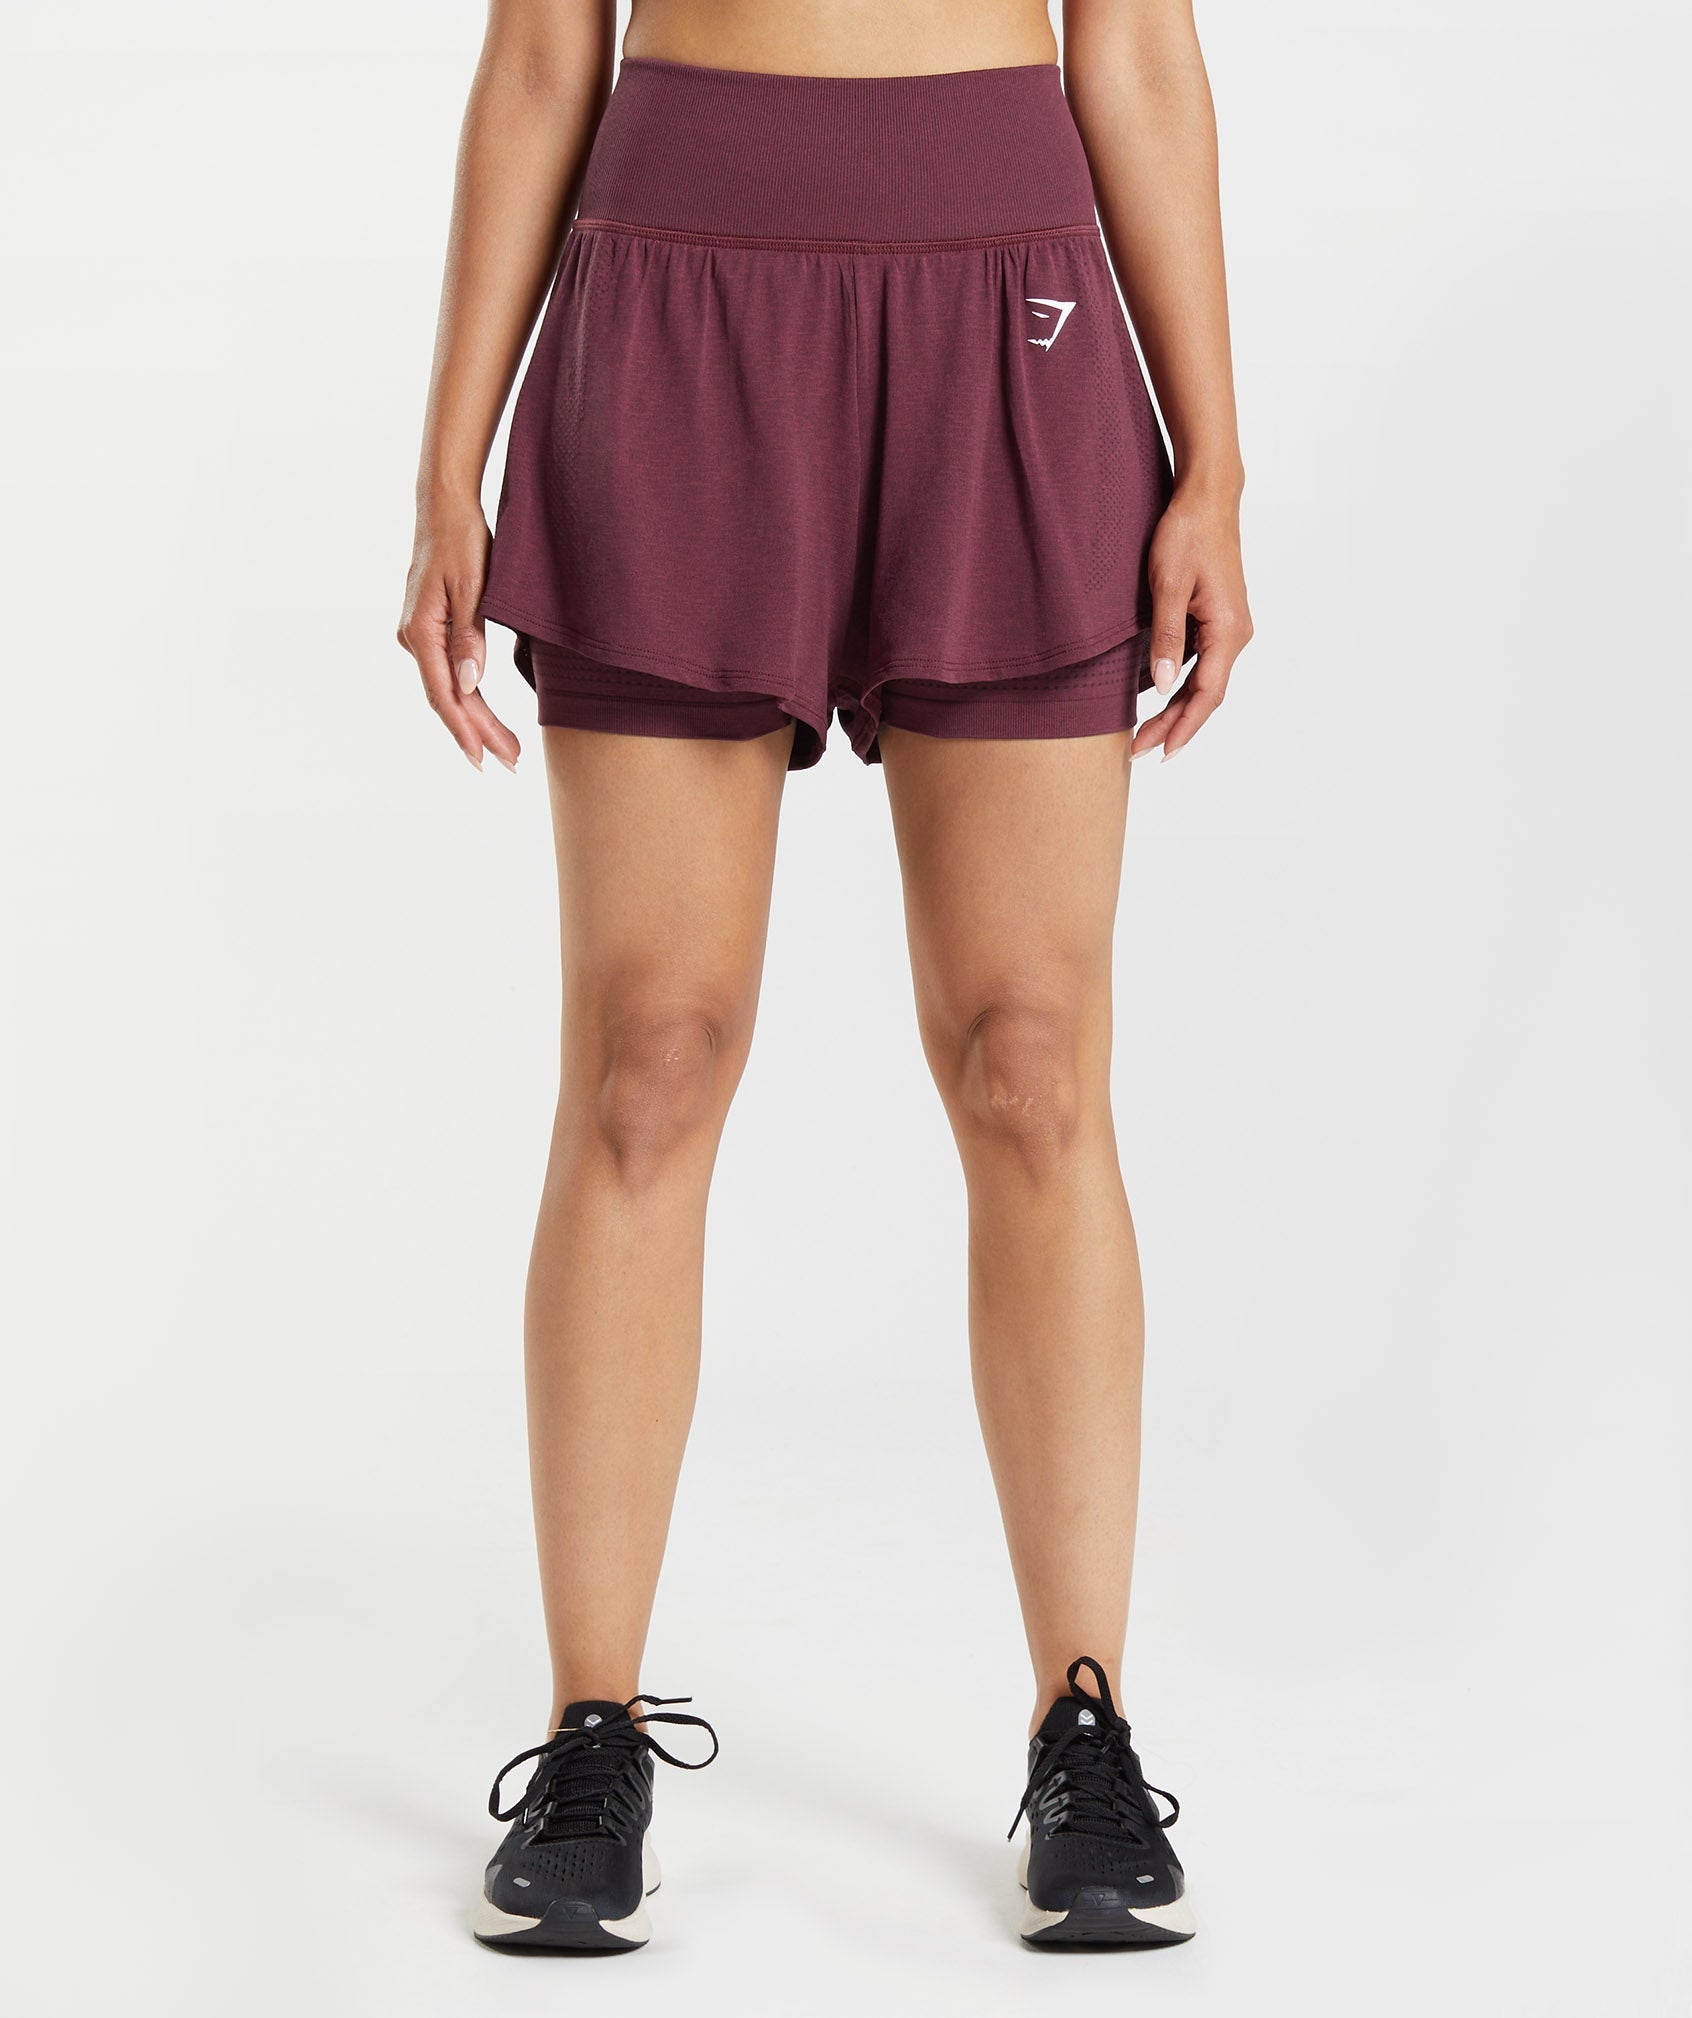 Vital Seamless 2.0 2-in-1 Shorts in Baked Maroon Marl